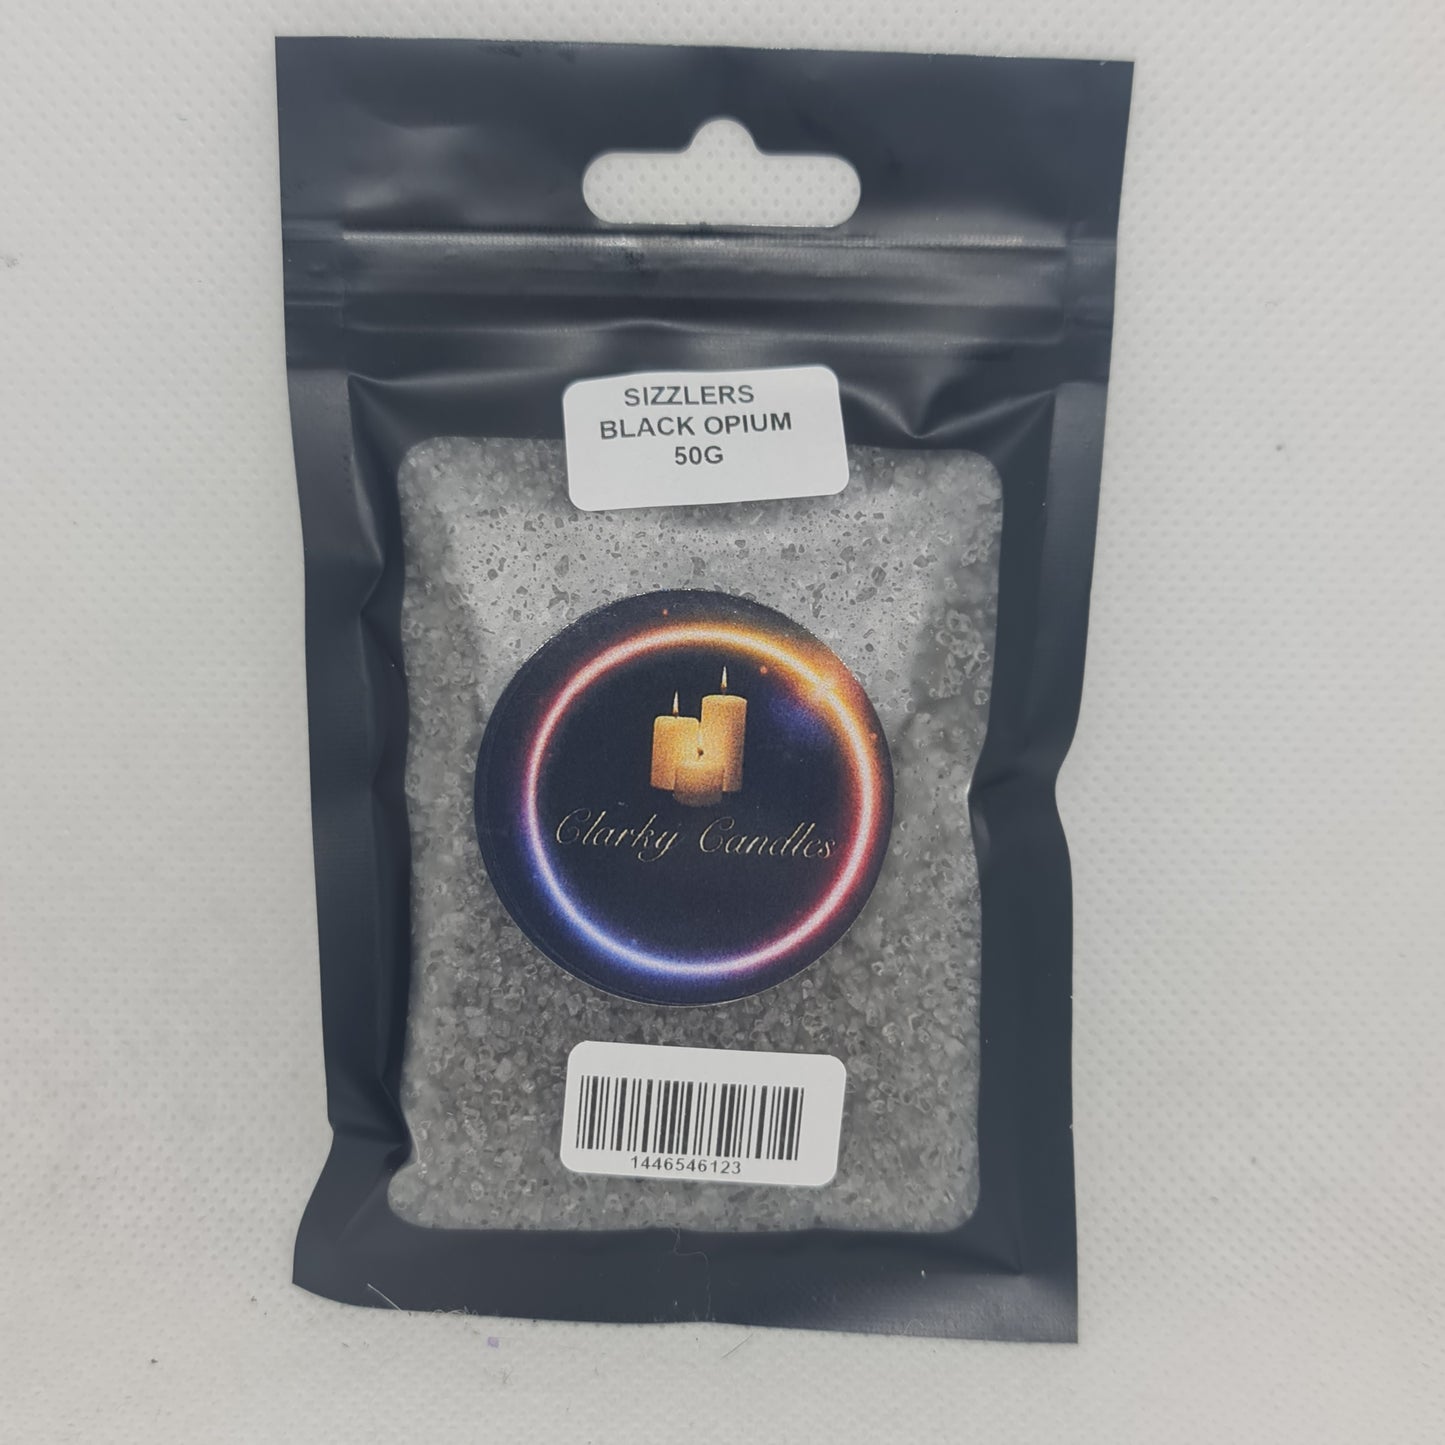 Black Opium - 50g - Scented Sizzlers